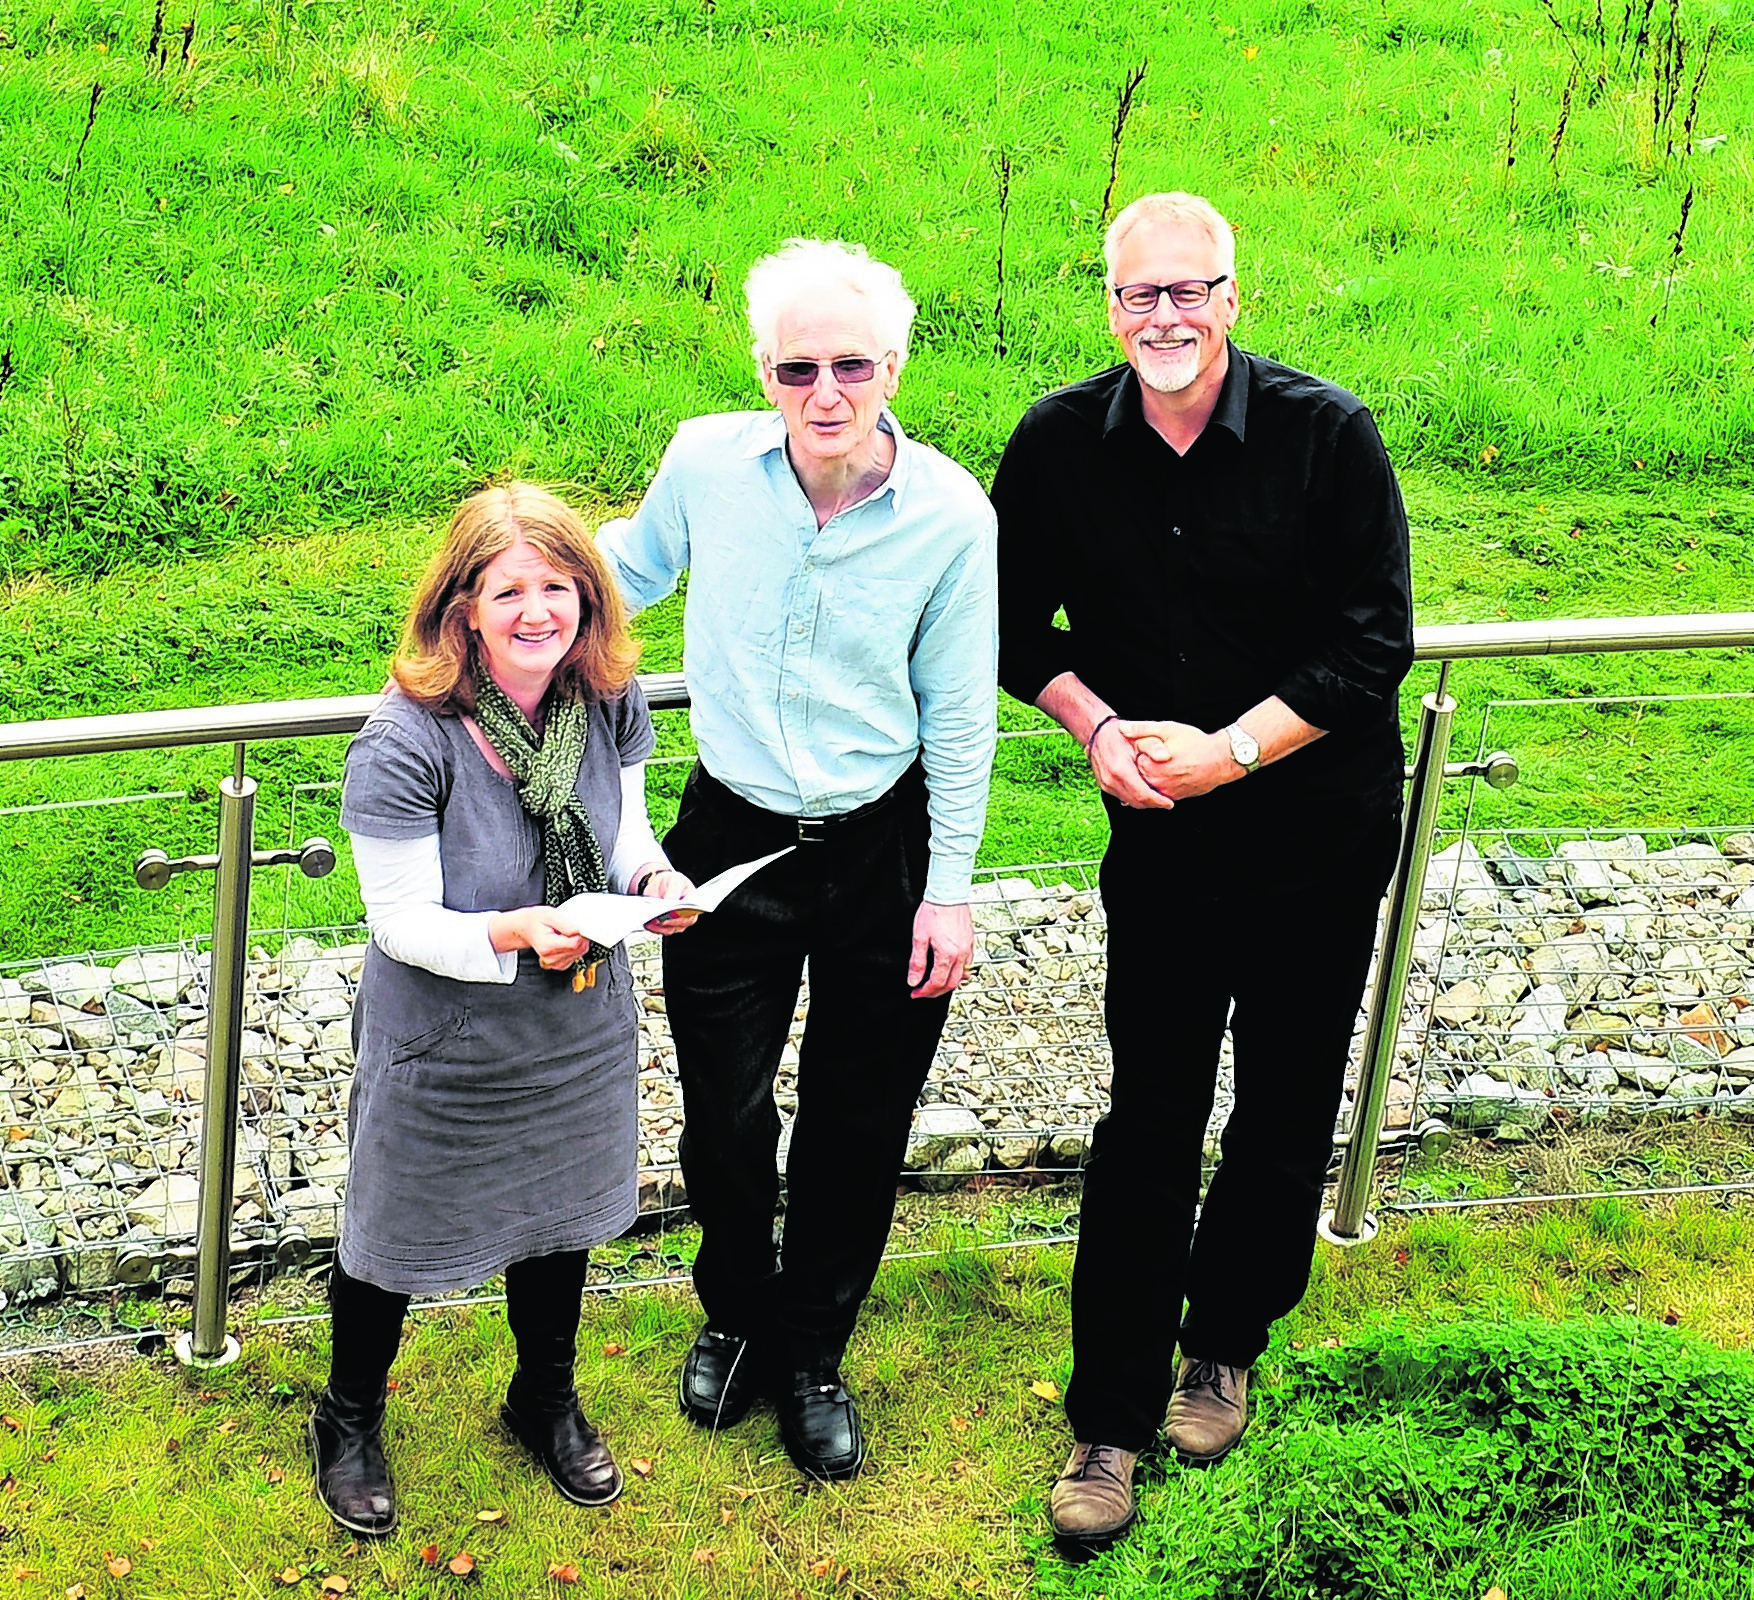 Festival founders Fiona Robertson, Mark Hope and Pete Stollery